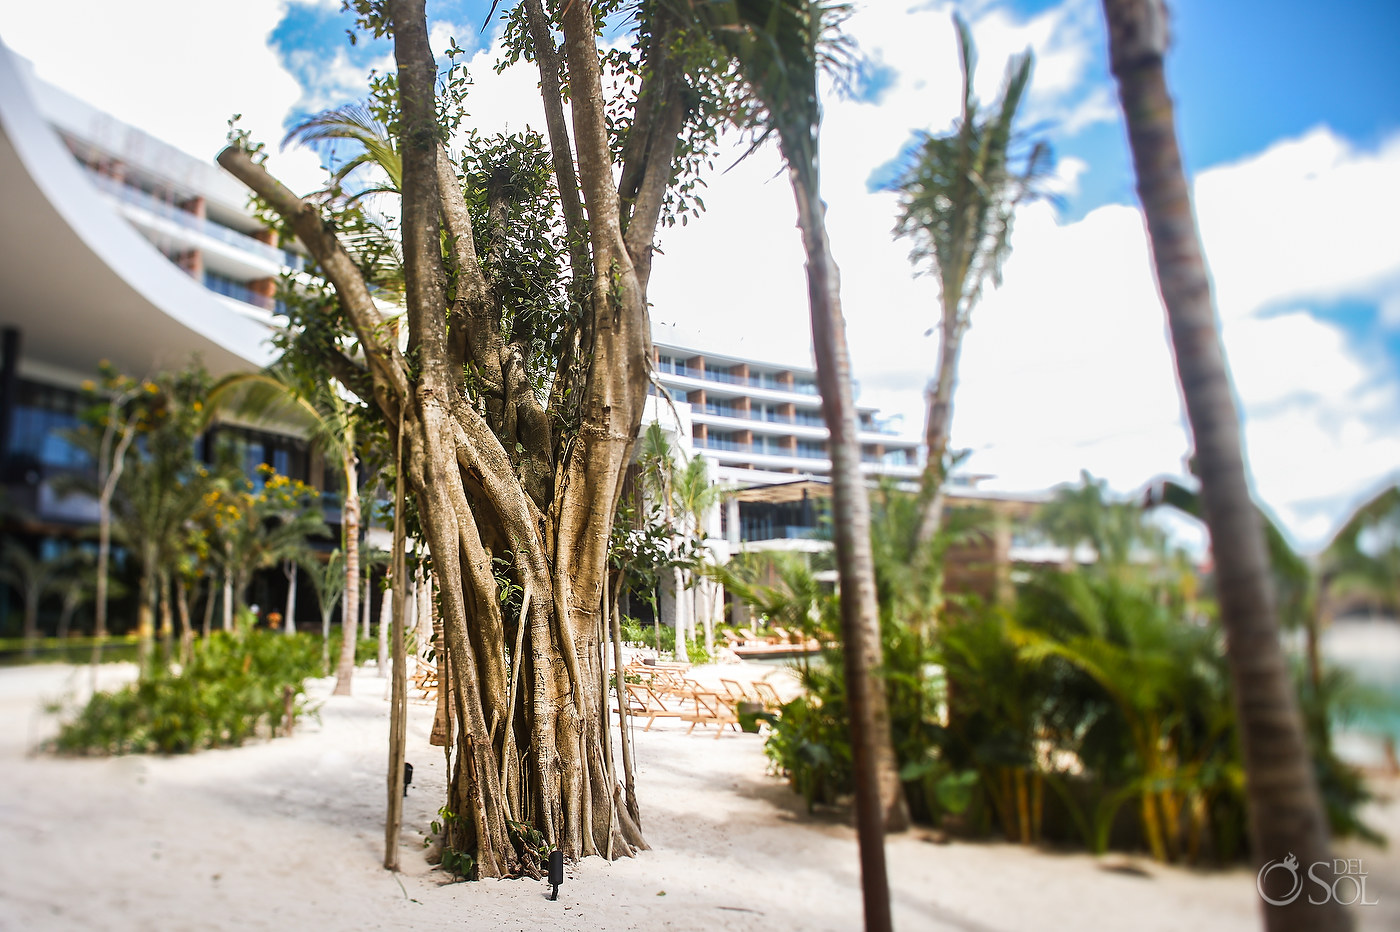 The Moxche , a local tree to quintana roo, is the tree that the hotel was named after